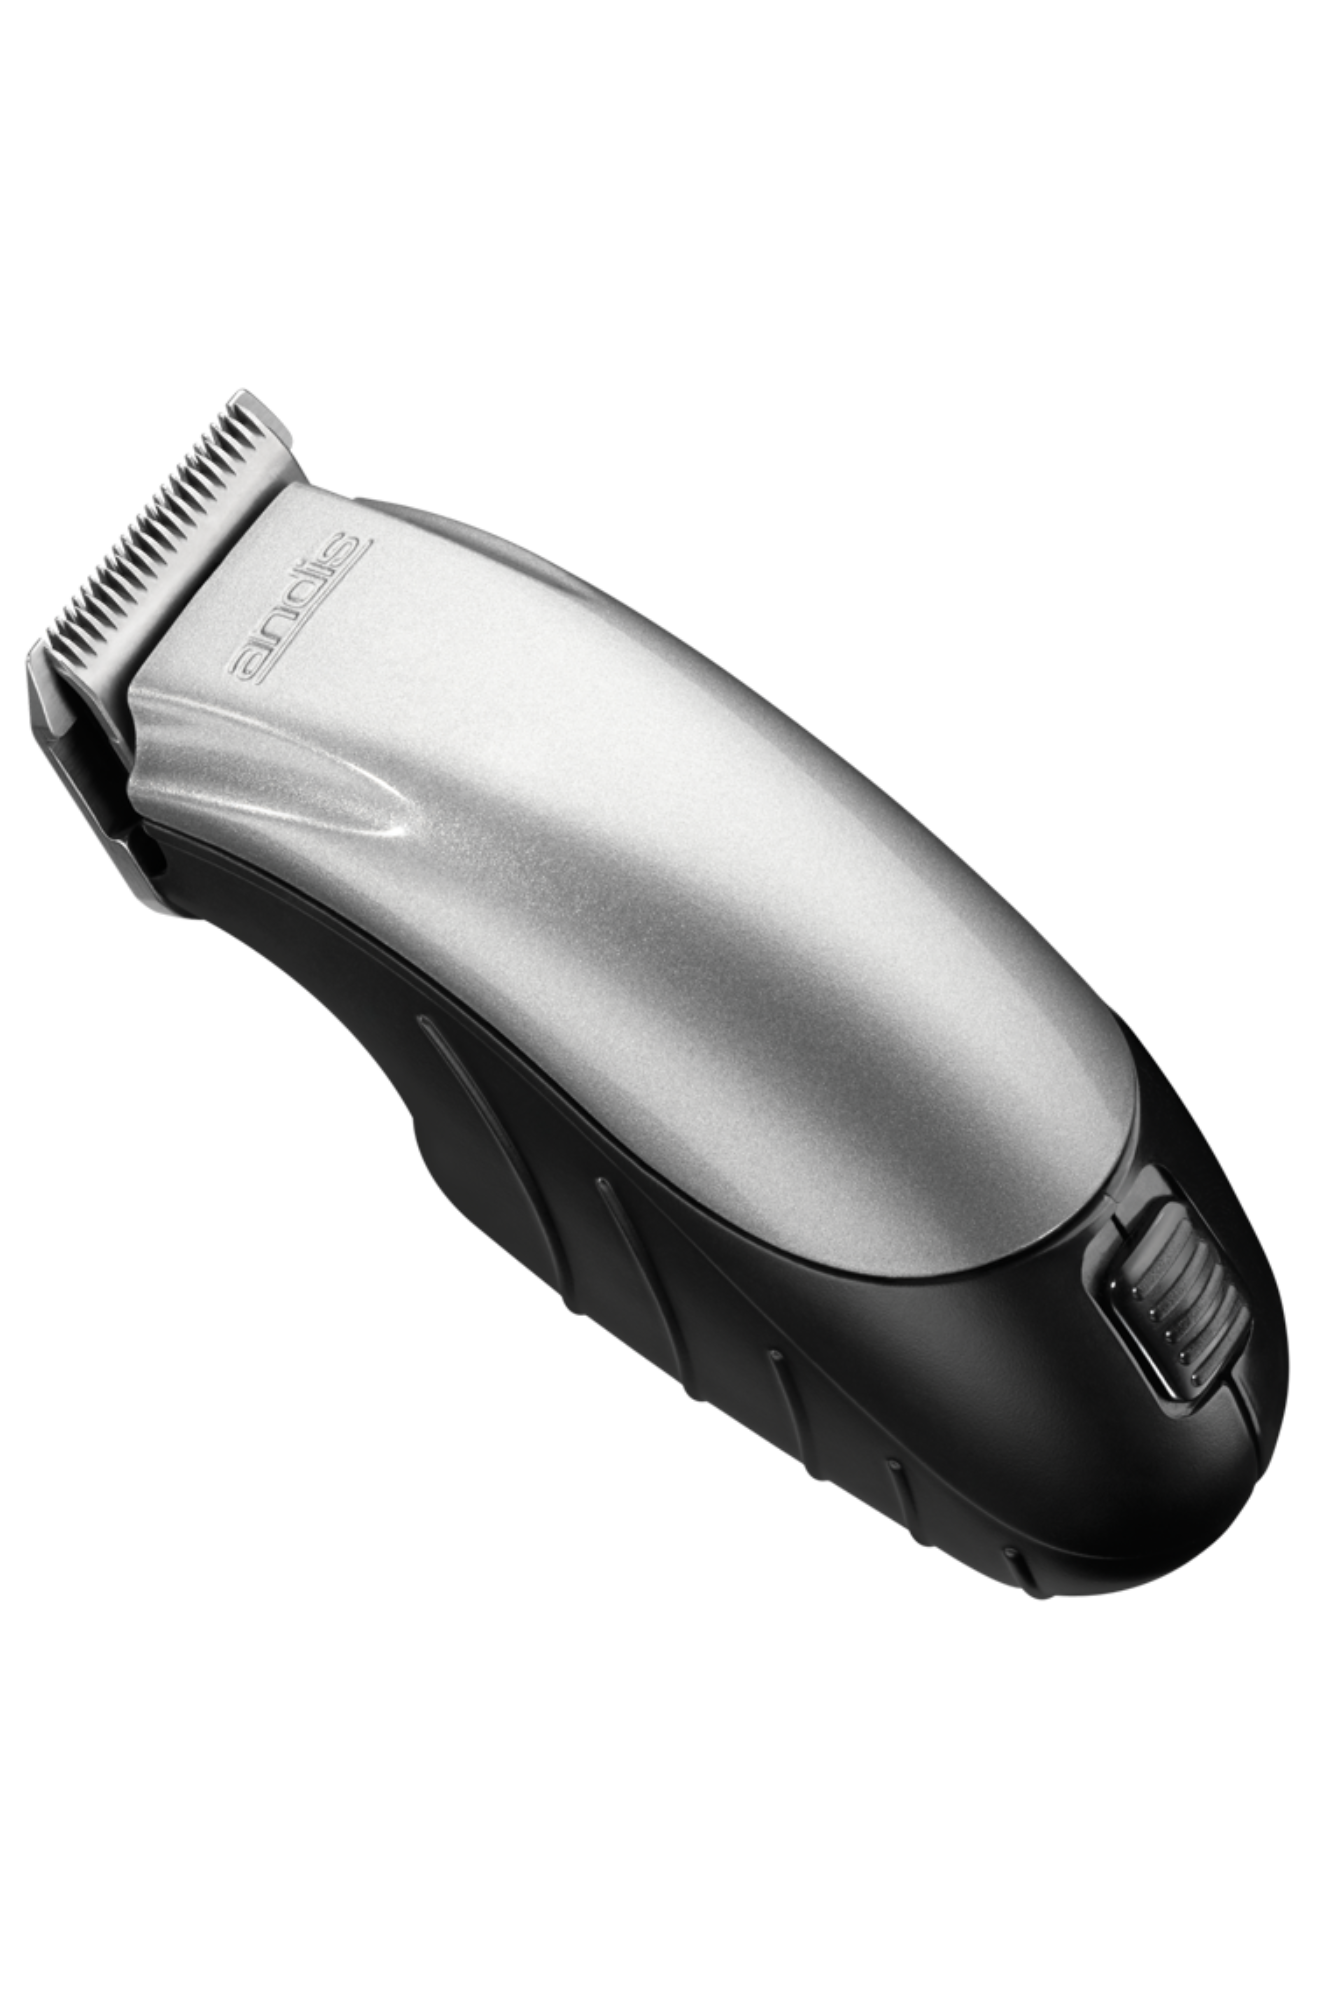 ANDIS TRIM N GO CORDLESS CLIPPERS